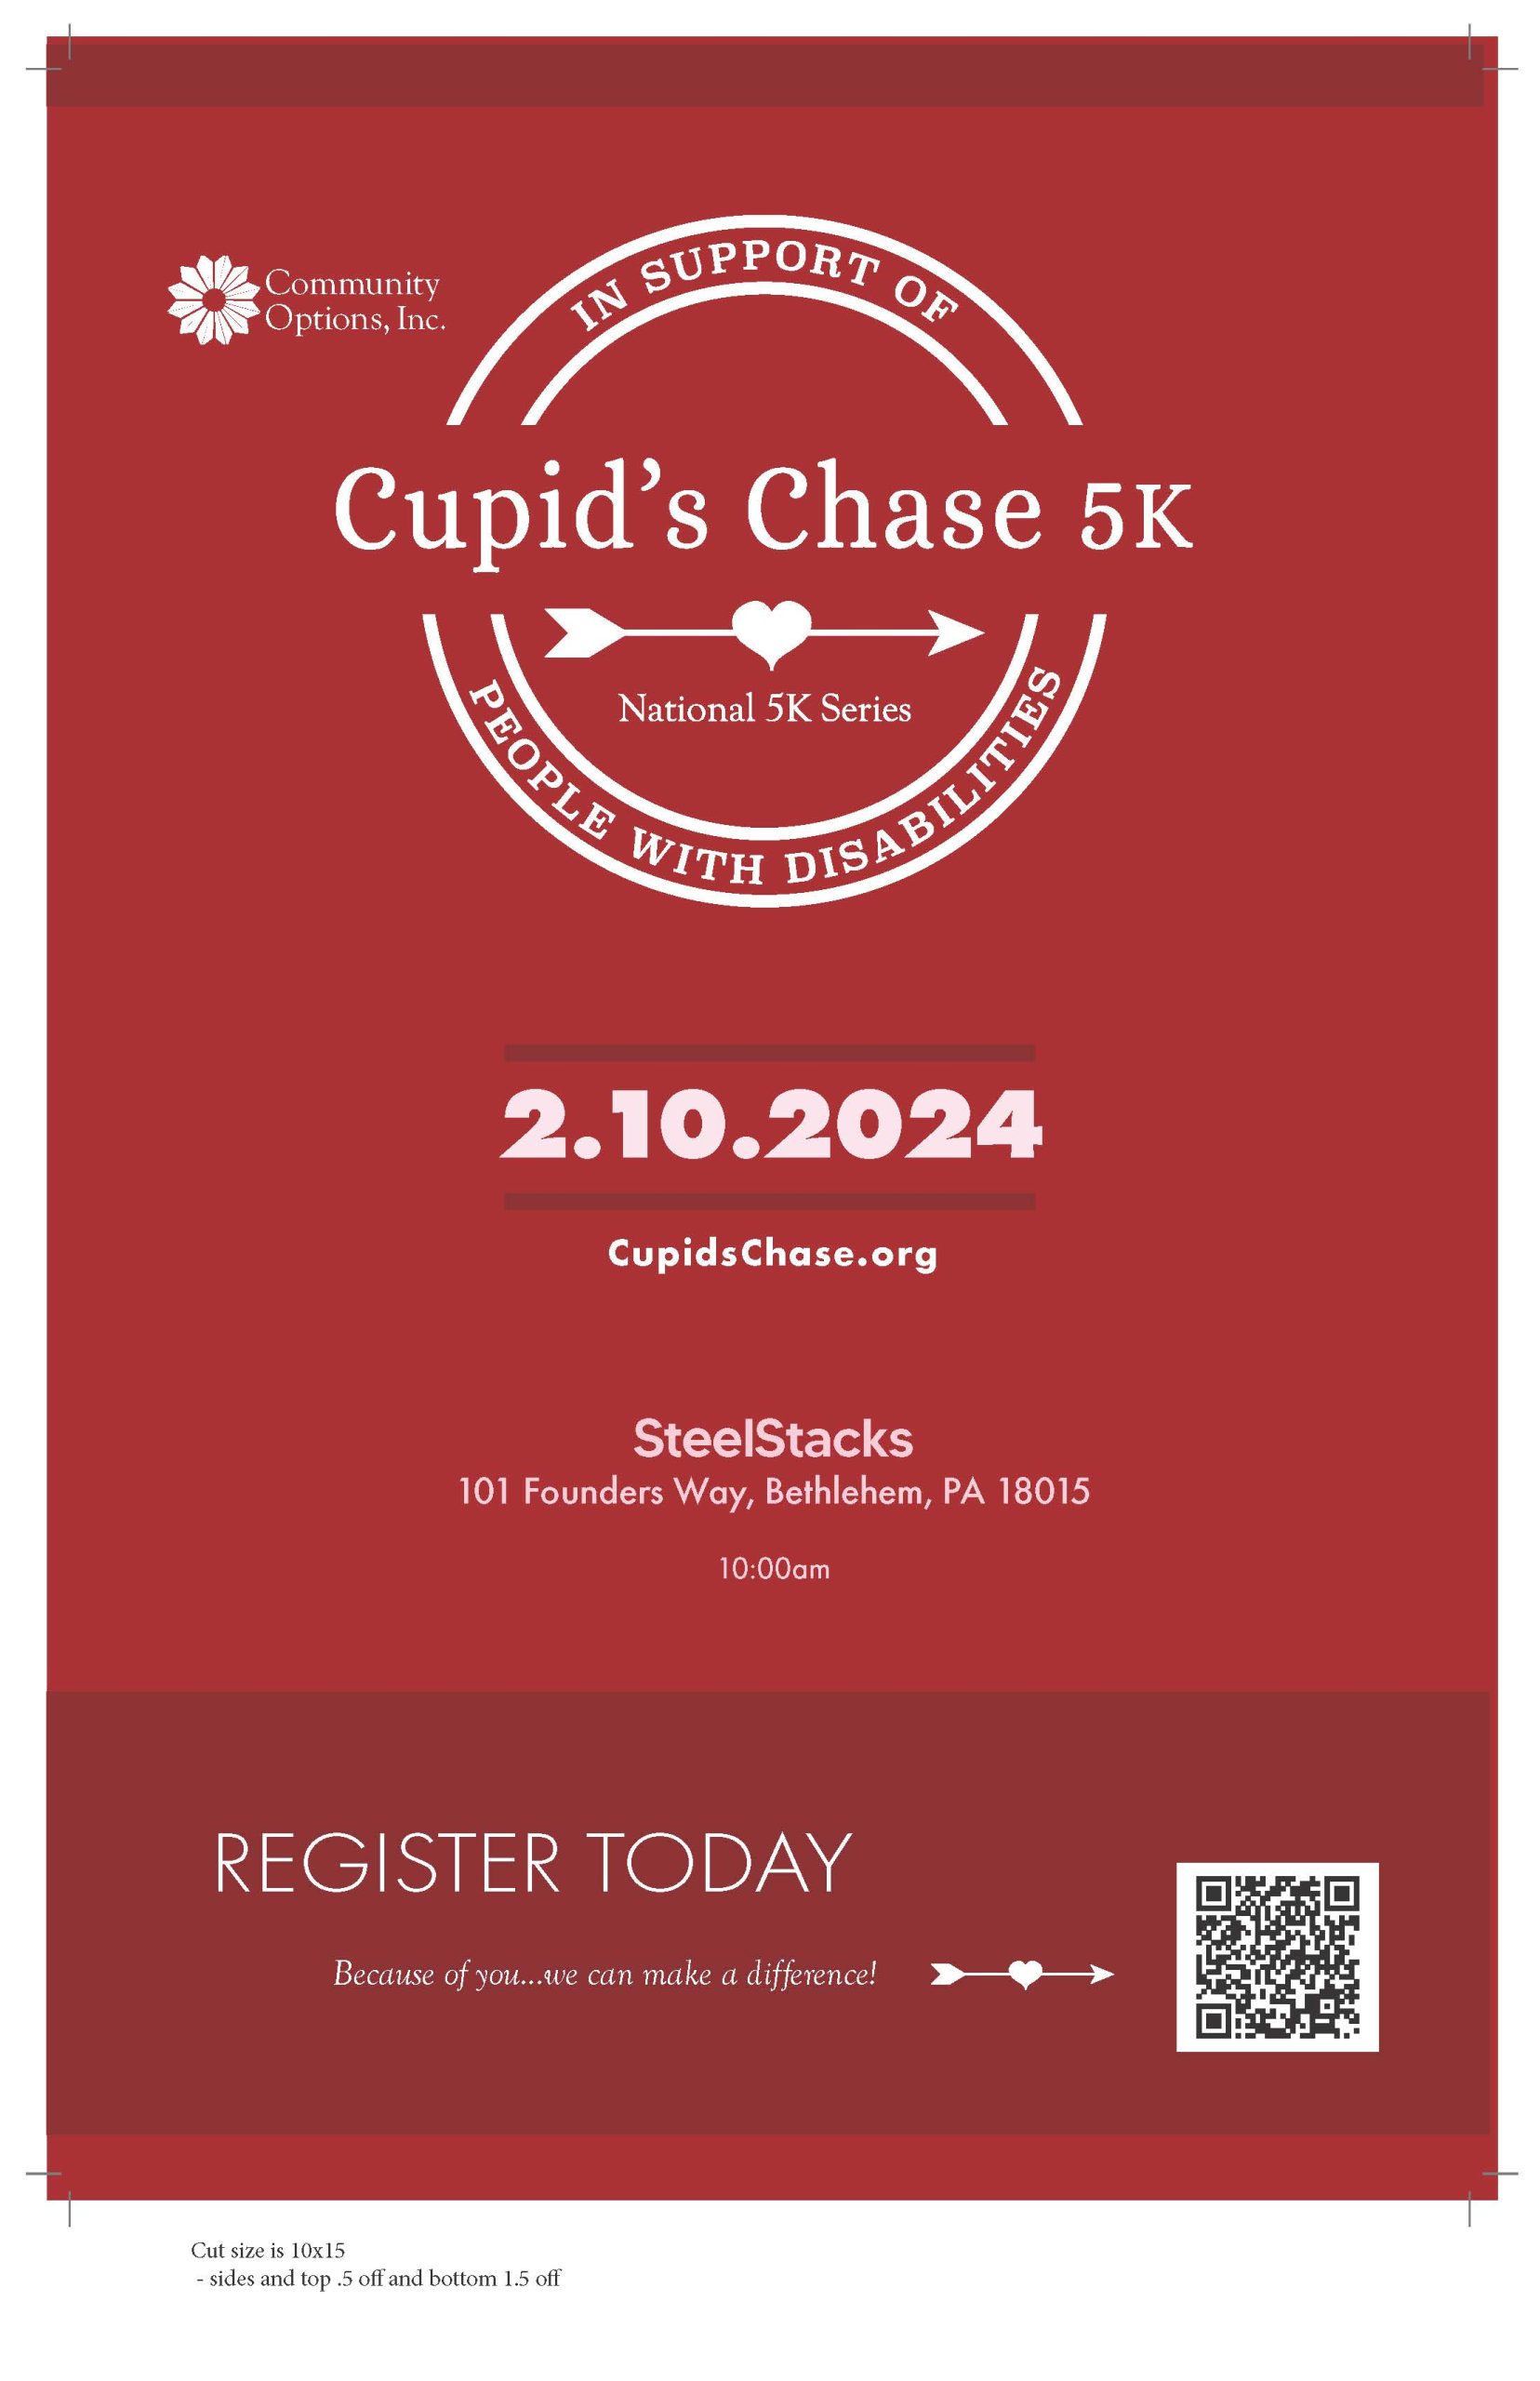 Cupid\\\\\\\\\\\\\\\\\\\\\\\\\\\\\\\'s Chase 5K